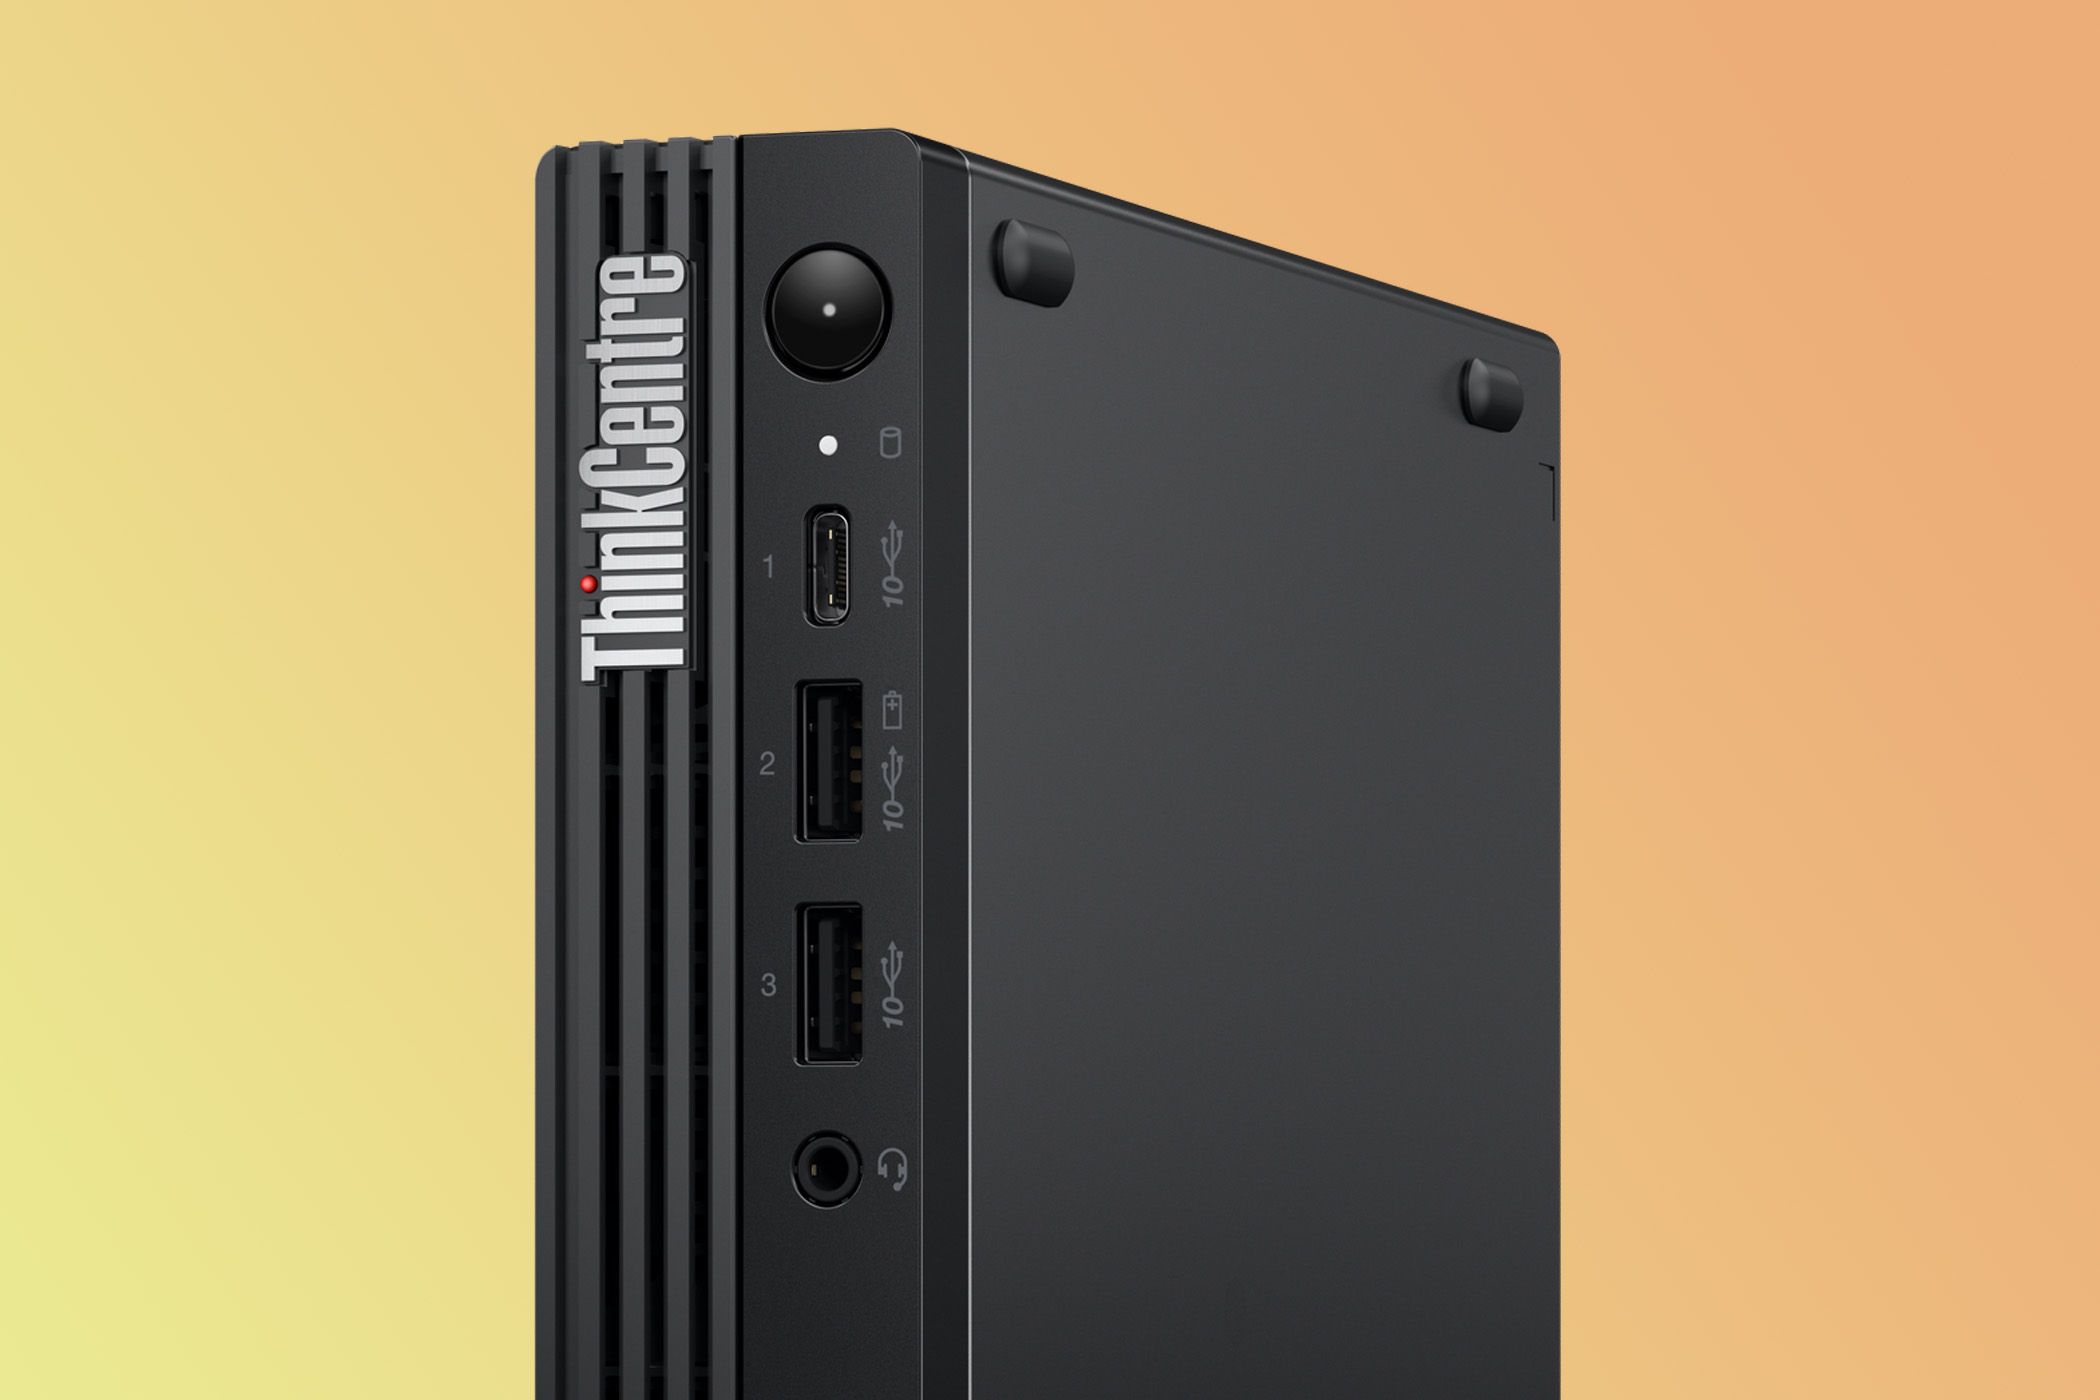 A small black tower PC with a ThinkCentre logo.